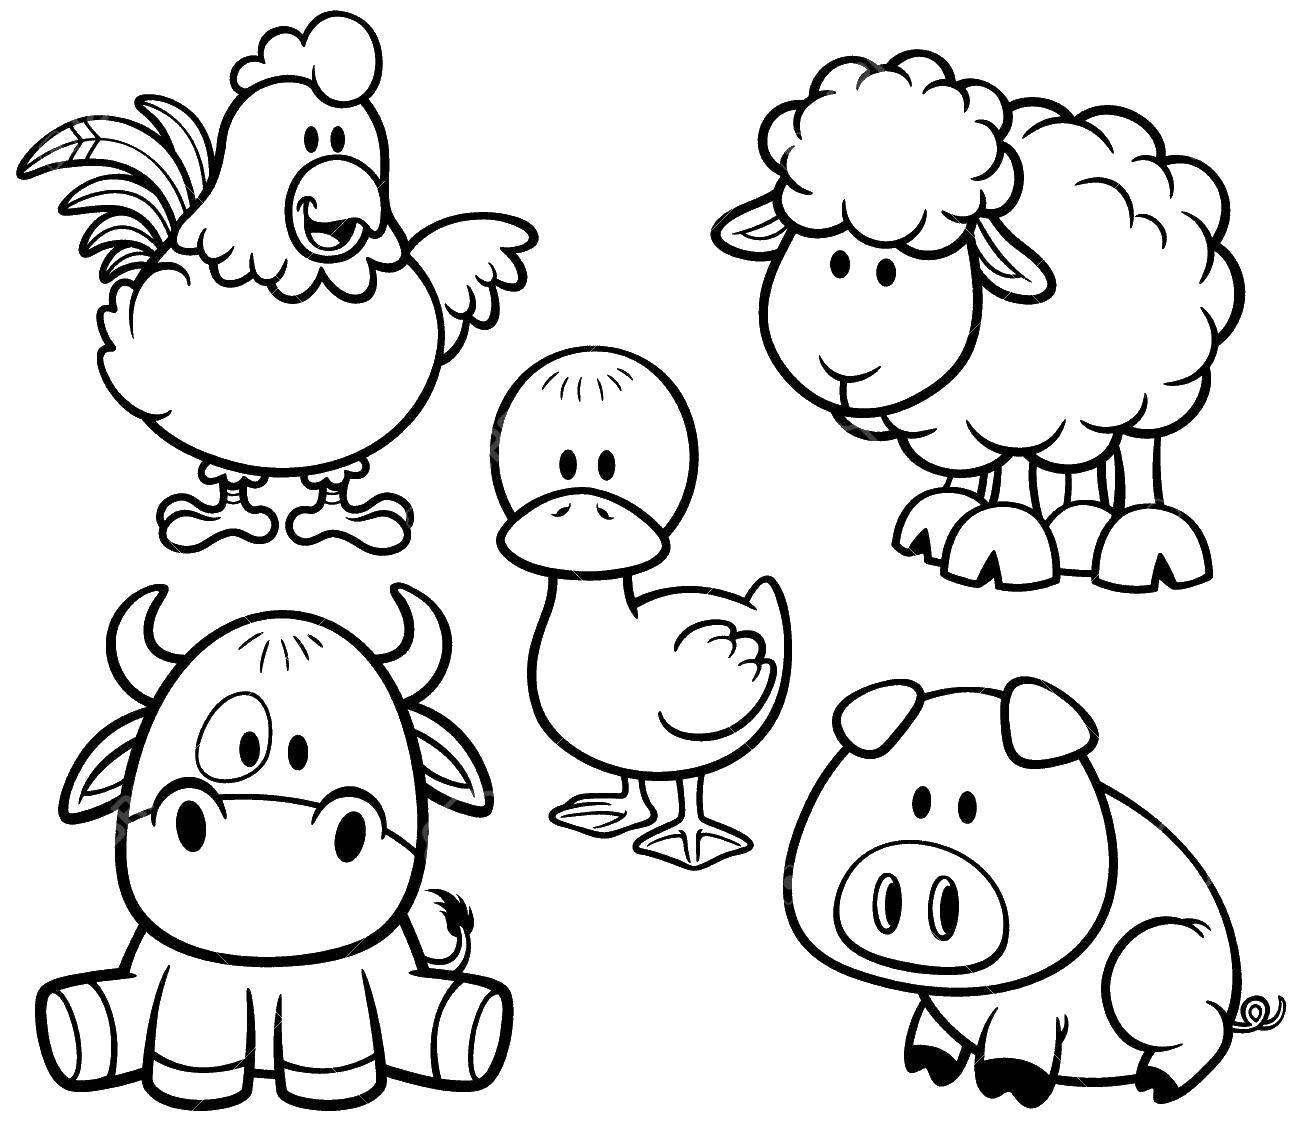 Coloring Pets. Category Pets allowed. Tags:  cattle , domestic animals, farm.